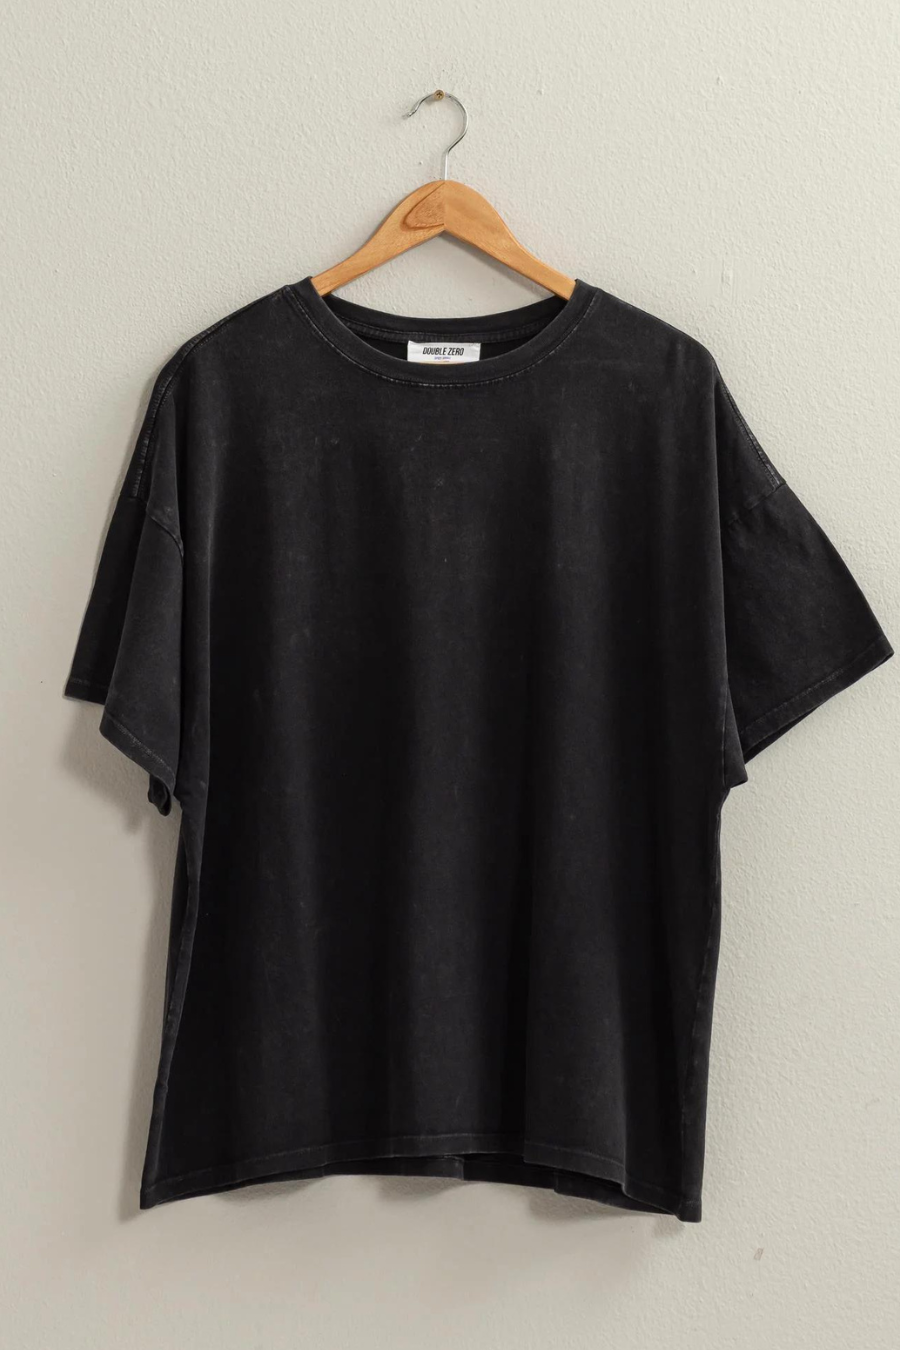 full view of Maisie over sized t in the color black, shirt is hanging on wooden hanger 